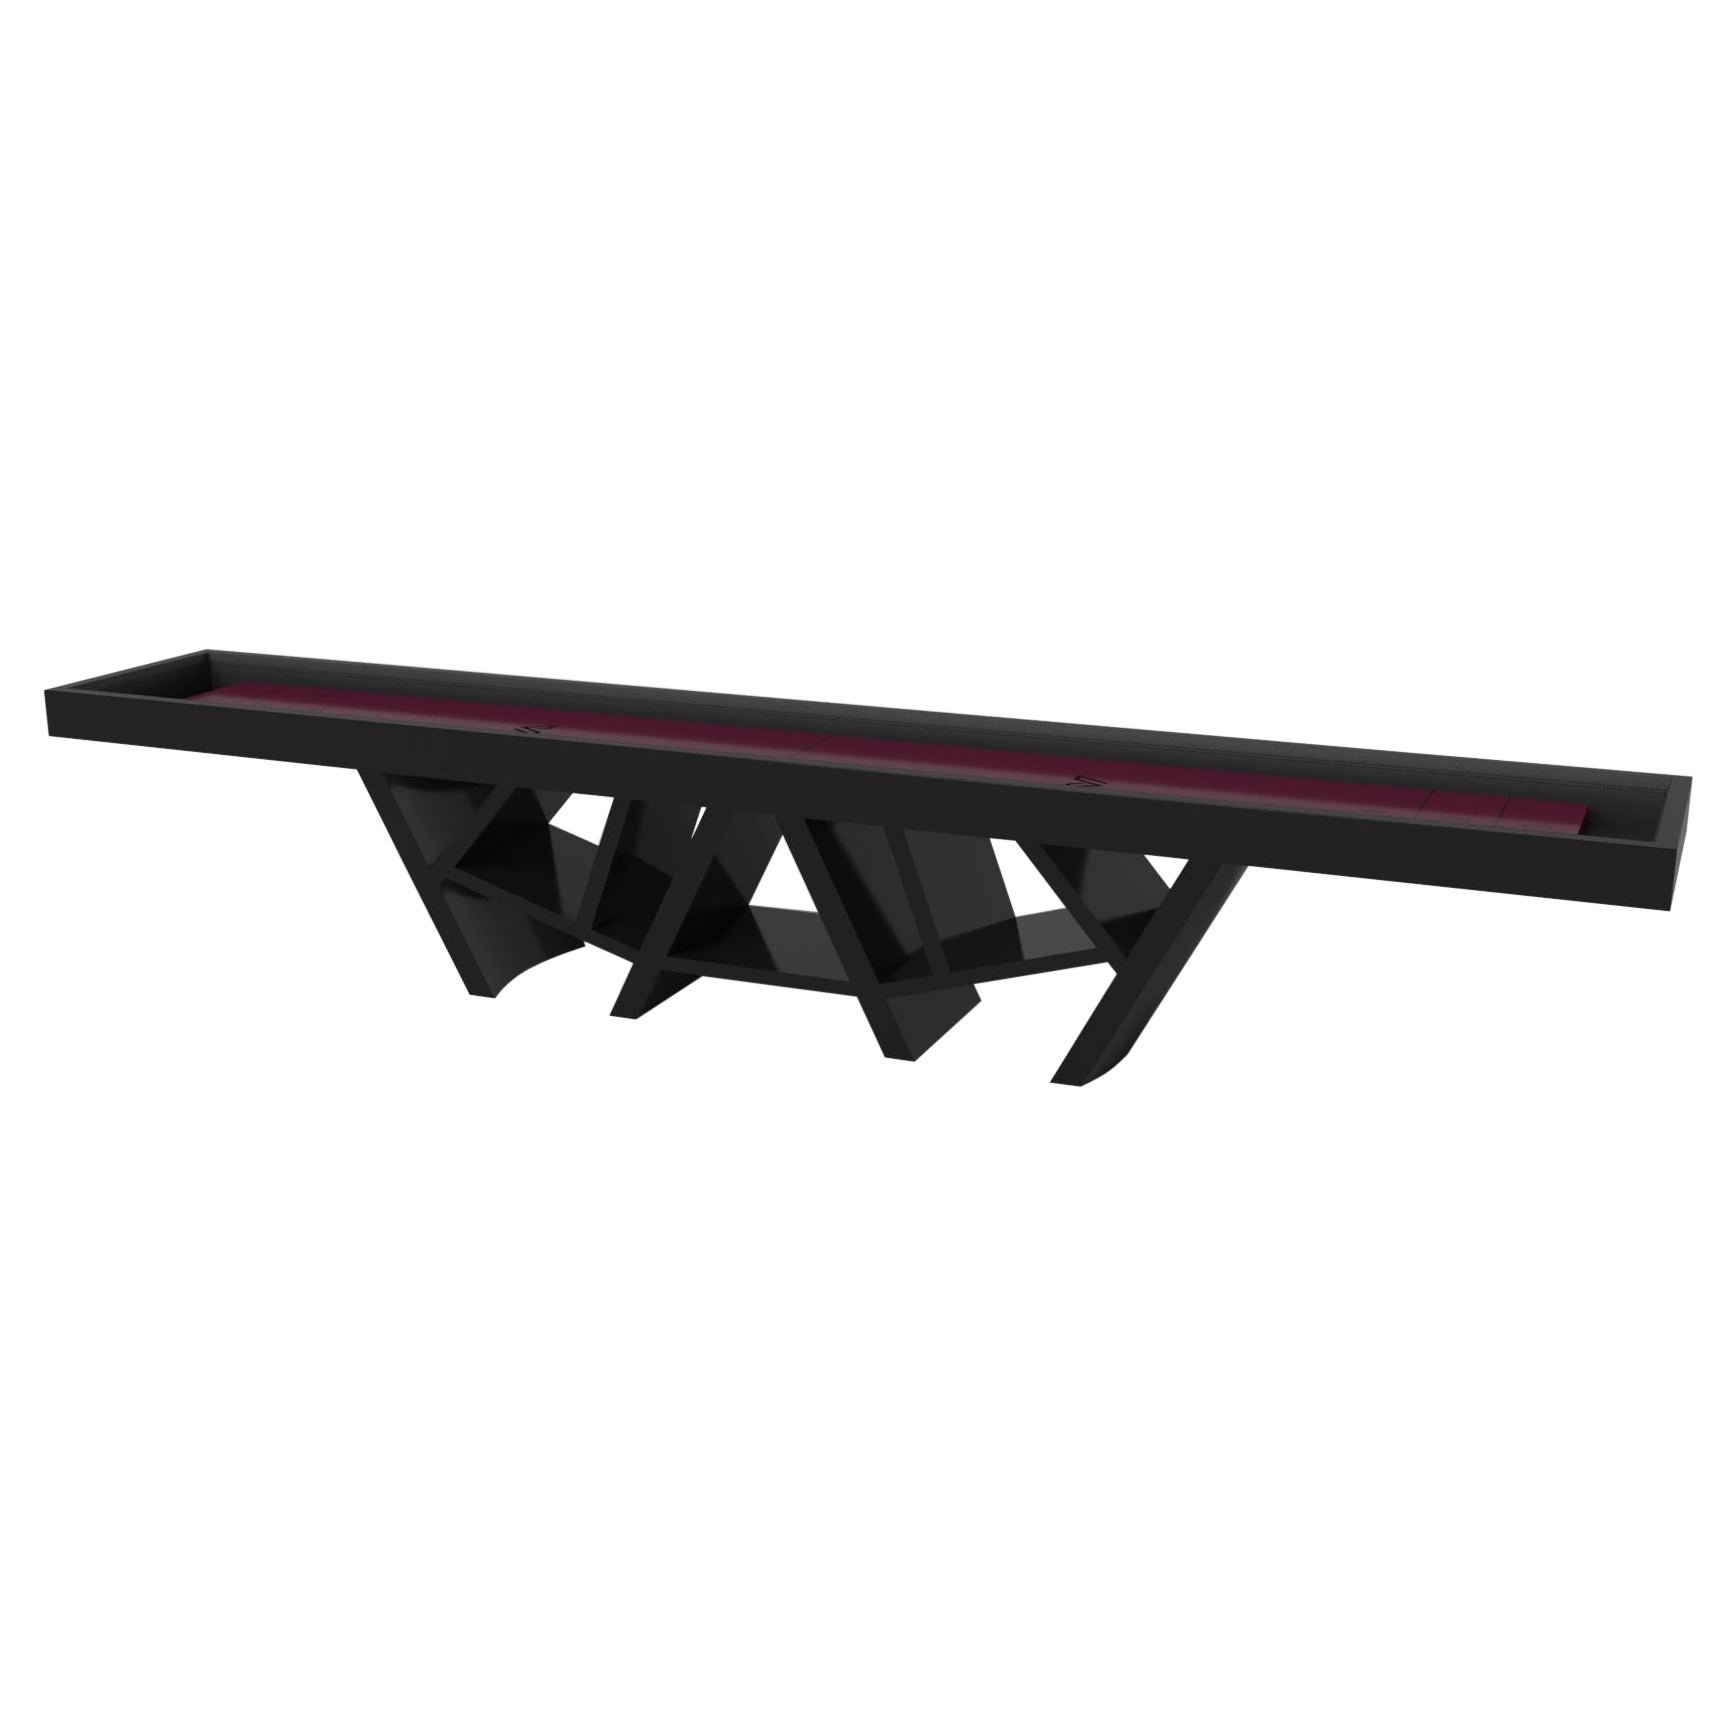 Elevate Customs Maze Shuffleboard Tables / Solid Pantone Black Color in 16' -USA